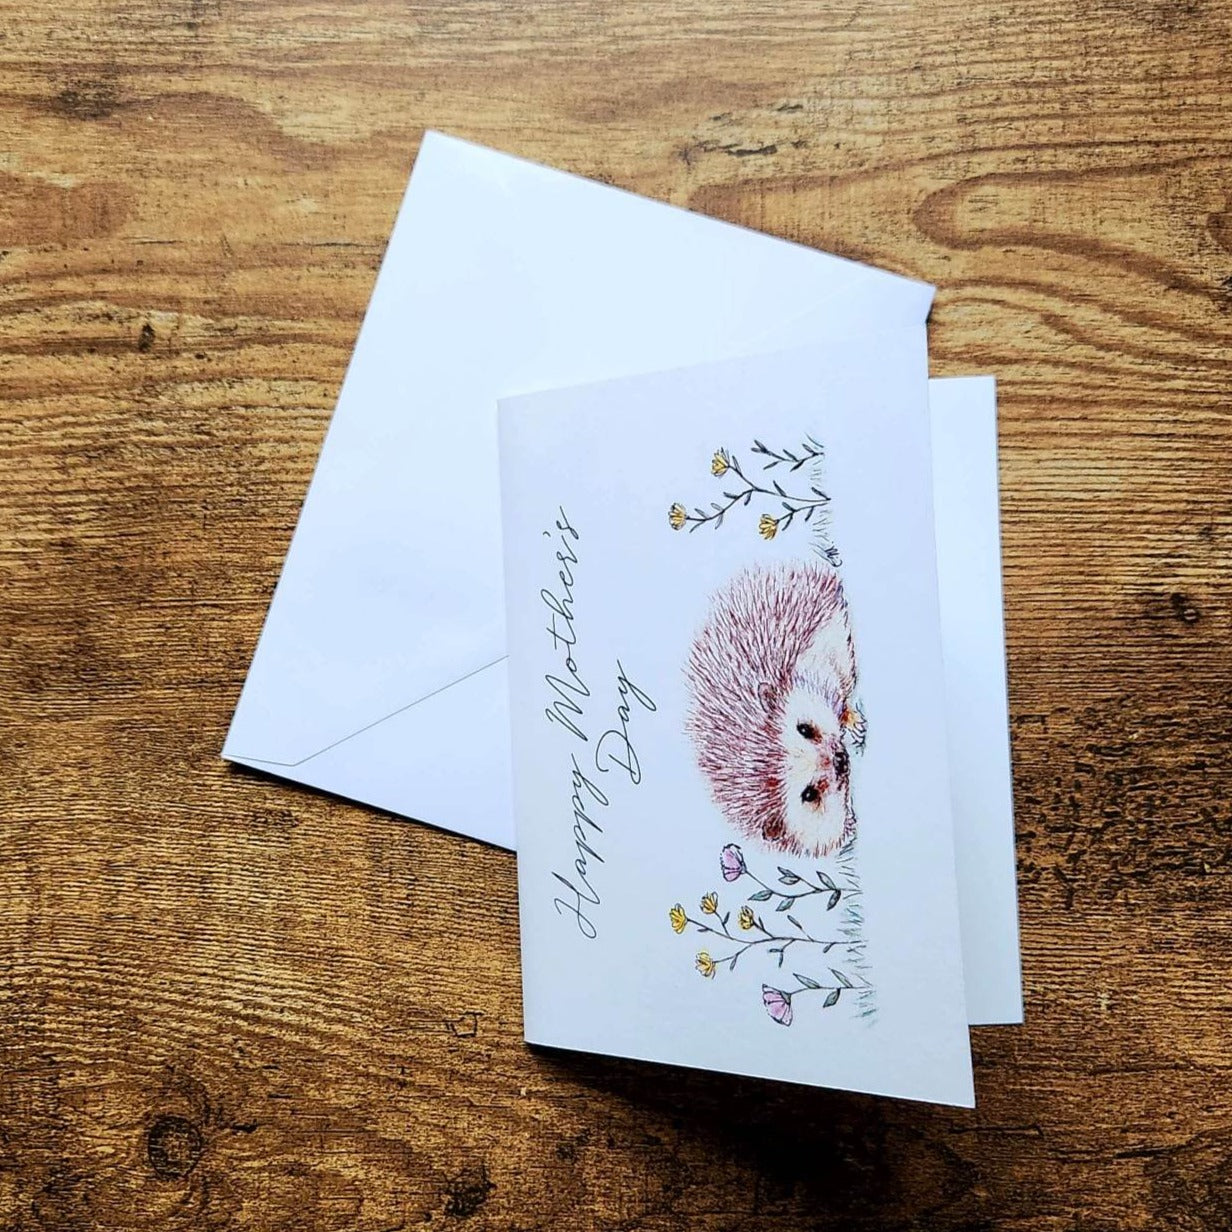 Happy Mother's Day Card, Mother's Day, Card for mom, Cute Animal card, Hedgehog card, Whimsical card, Celebrate mom card, Wildlife card